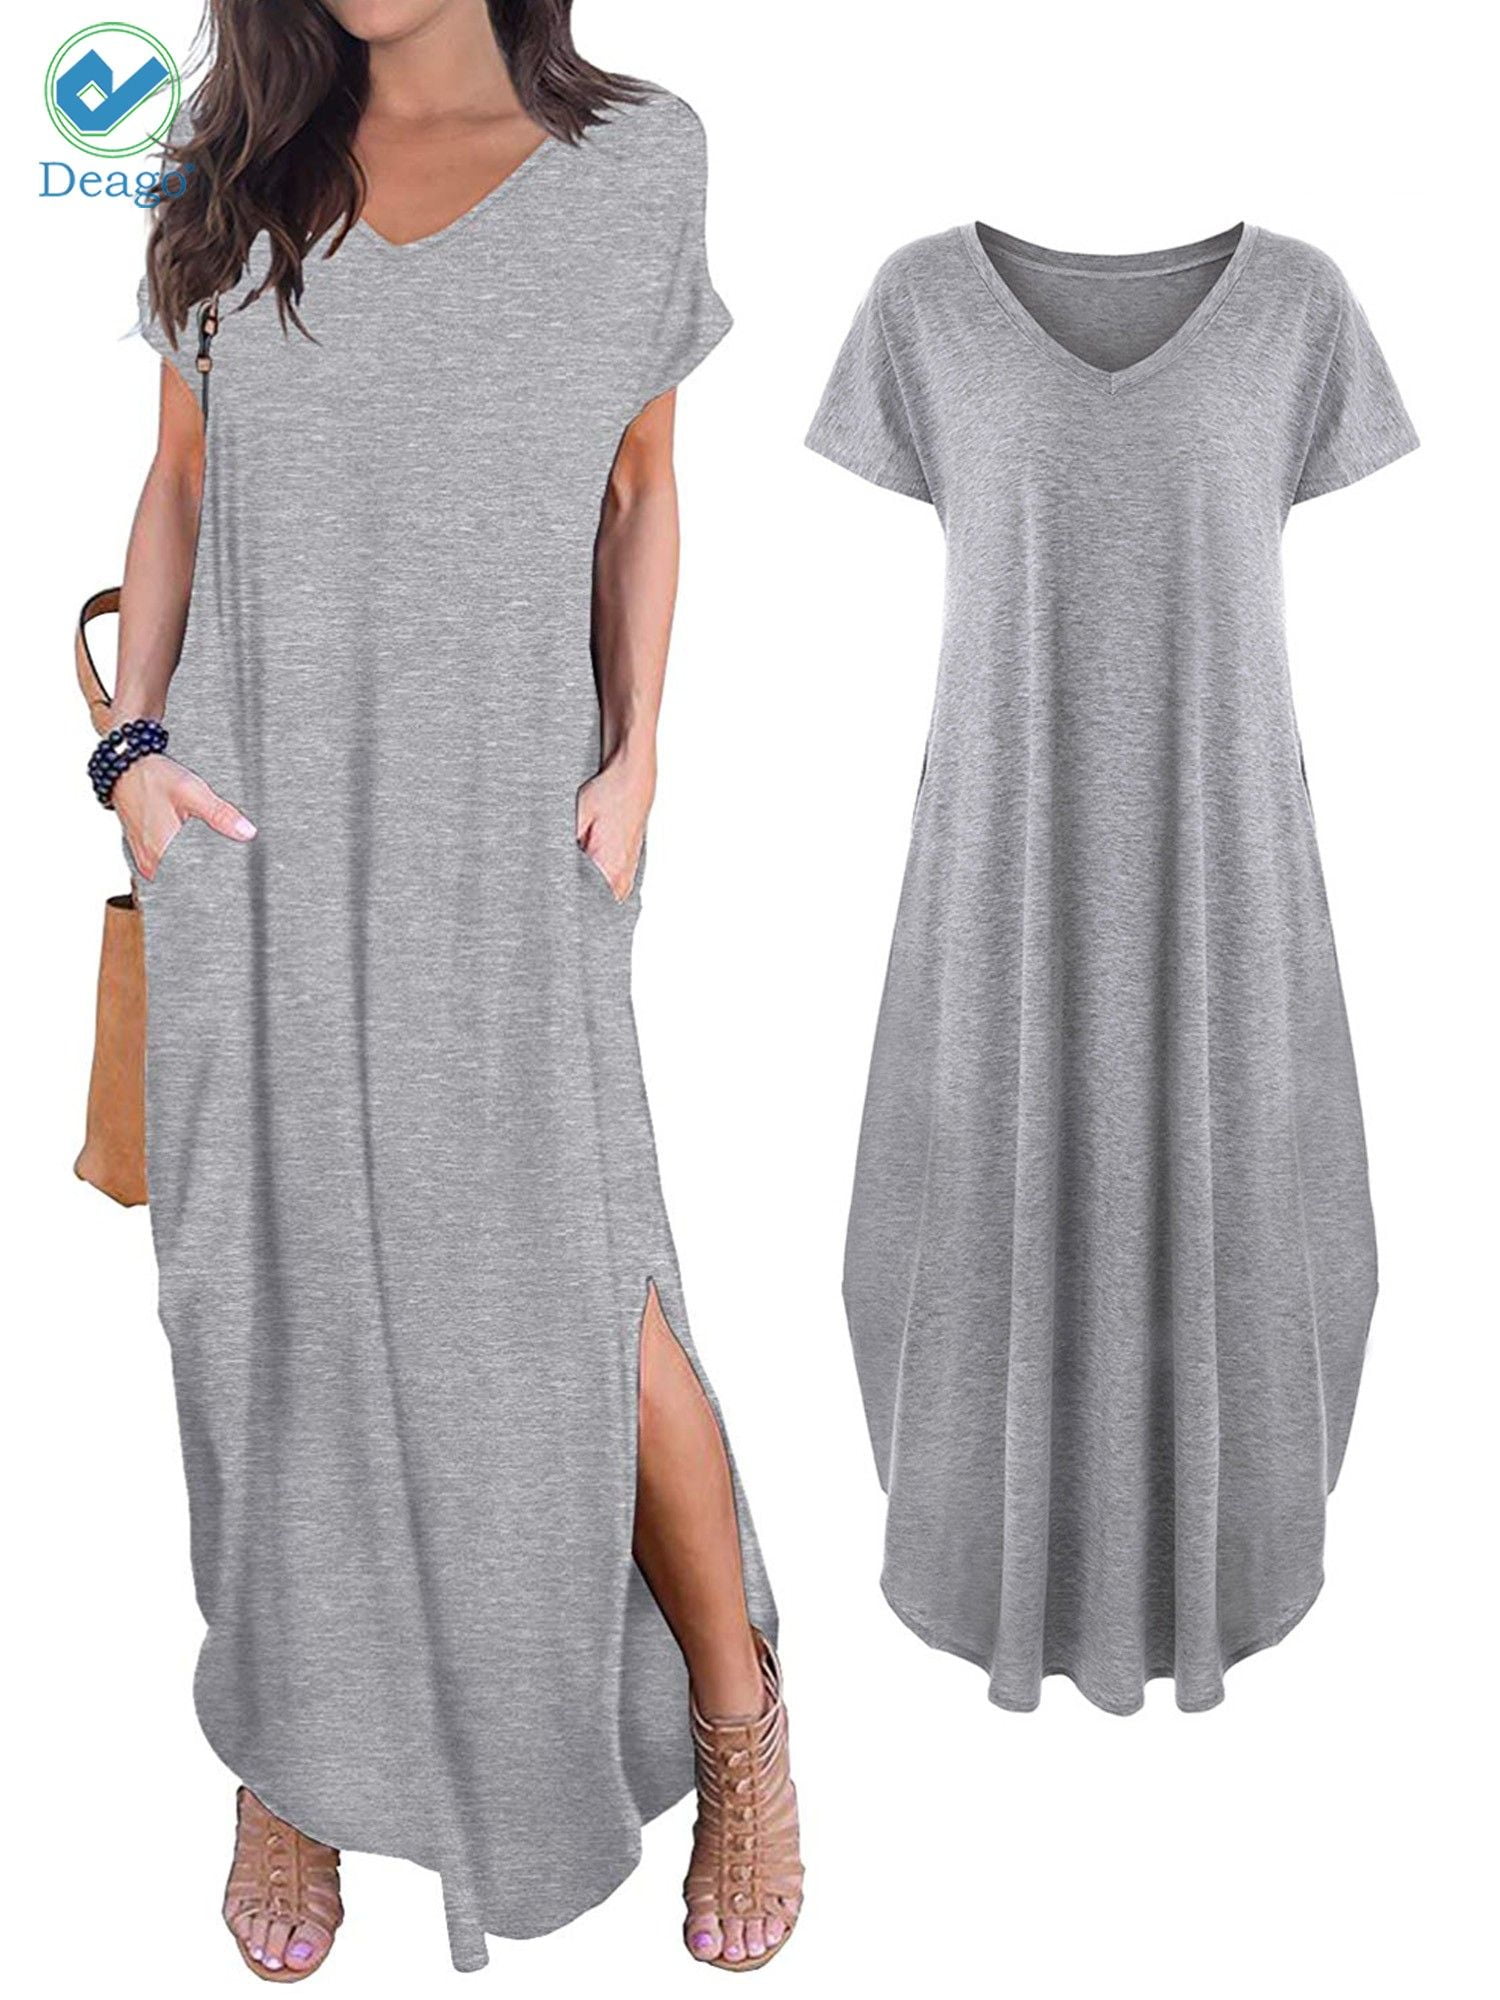 ✩HebeTop Women Long Sleeve Loose Knit Maxi Dresses Casual Long Dresses with Pocket